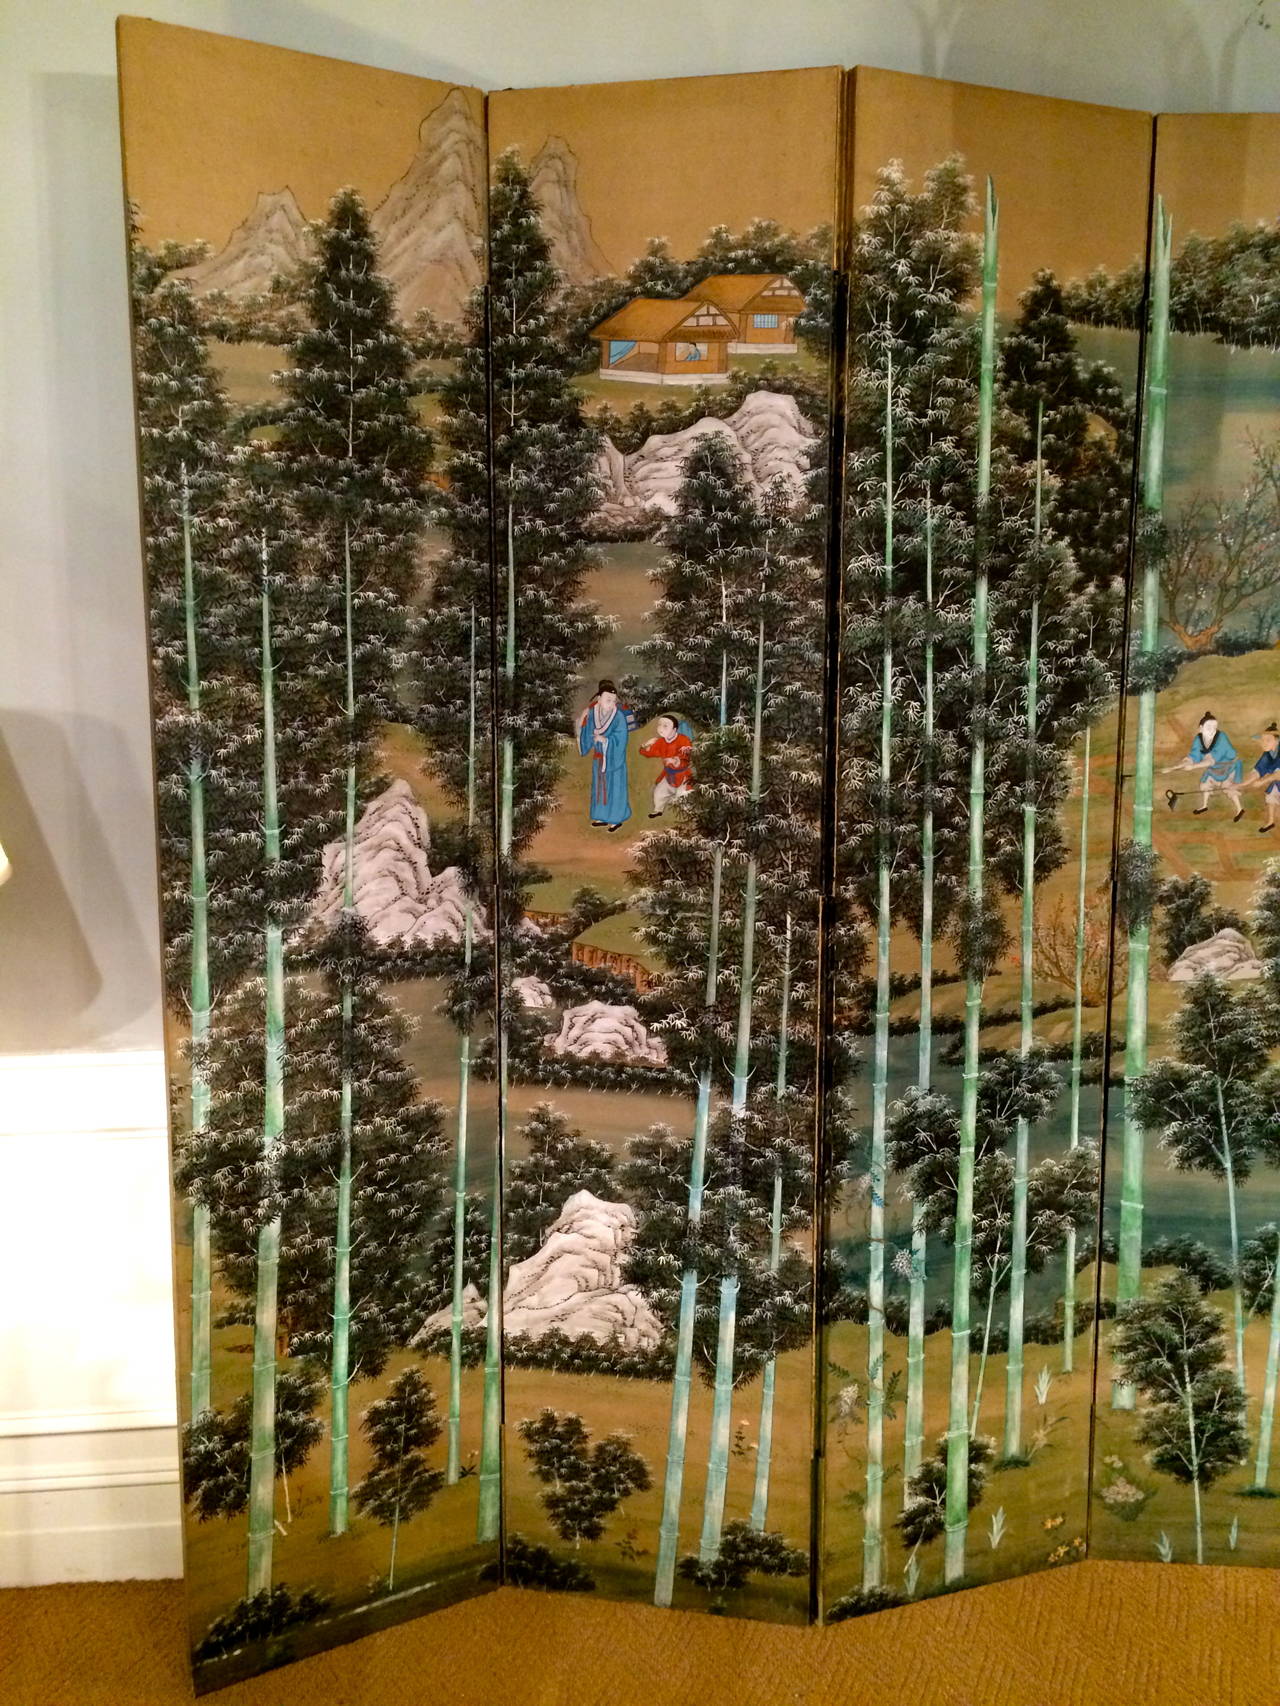 Fantastic large-scale Chinese hand-painted six-panel screen depicting a bamboo forest interspersed with groups of figures and rock outcroppings. Hand painted paper laid down on board. The vertical lines of the bamboo trees give this screen a very